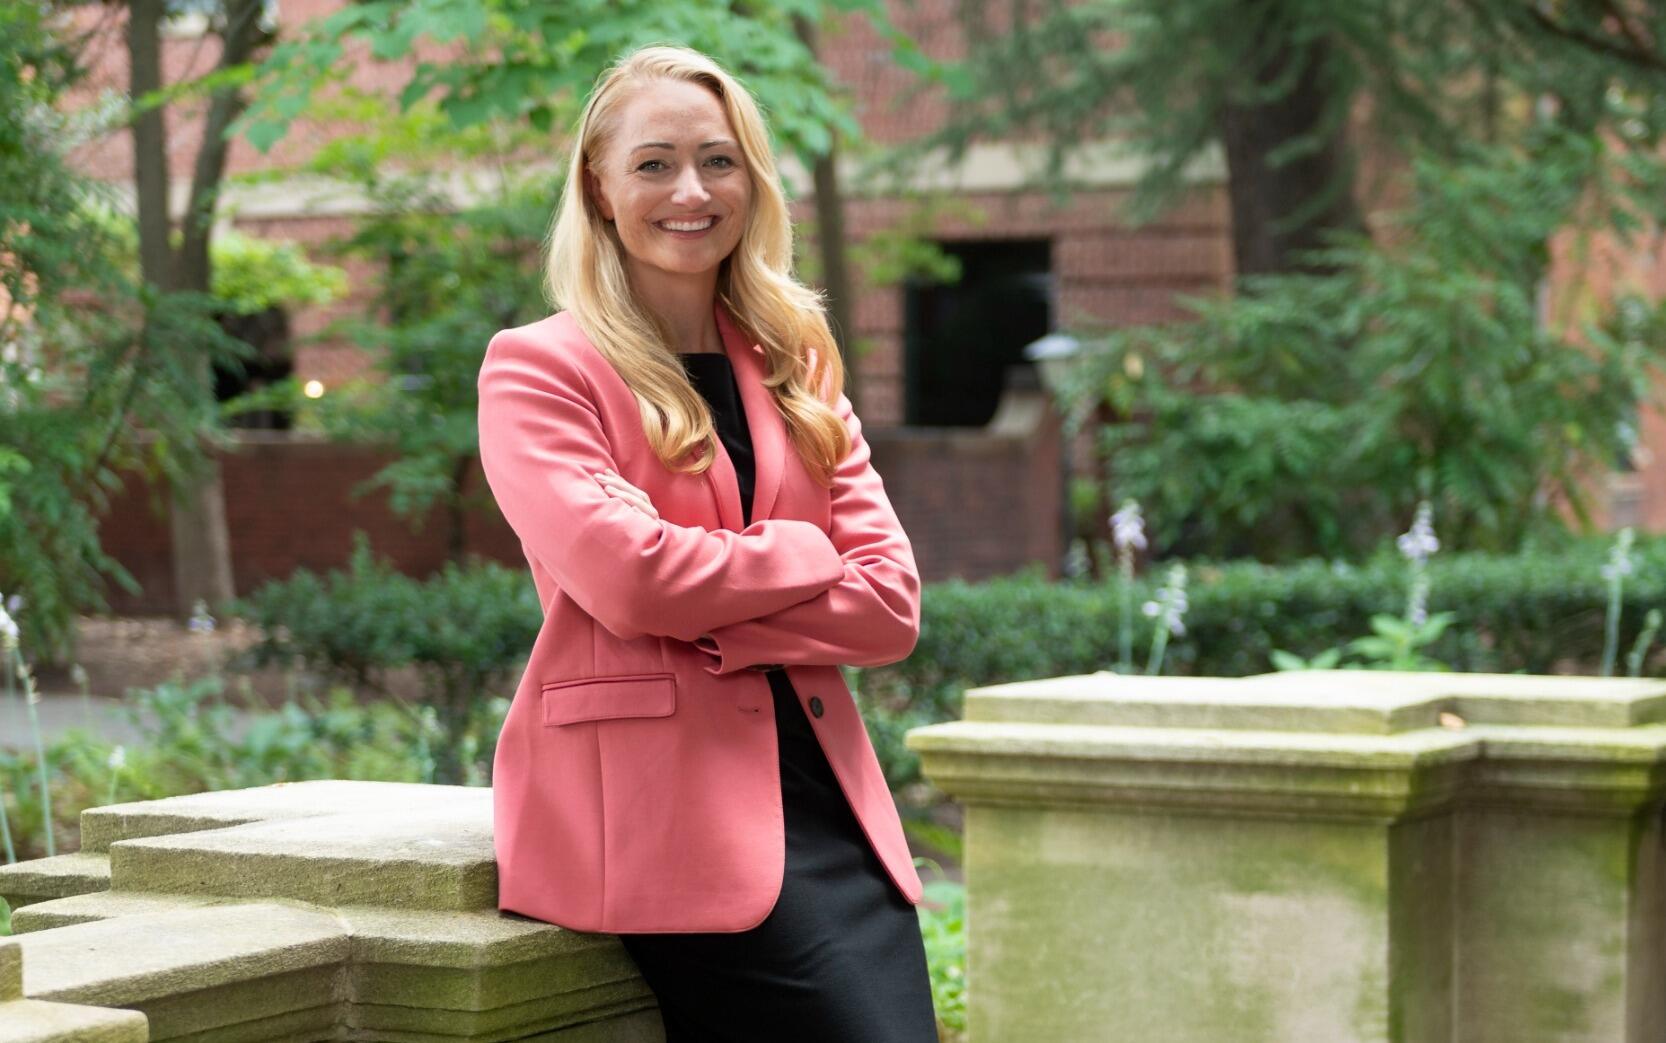 New VCU Business dean believes ‘the opportunities here are endless’ – VCU News